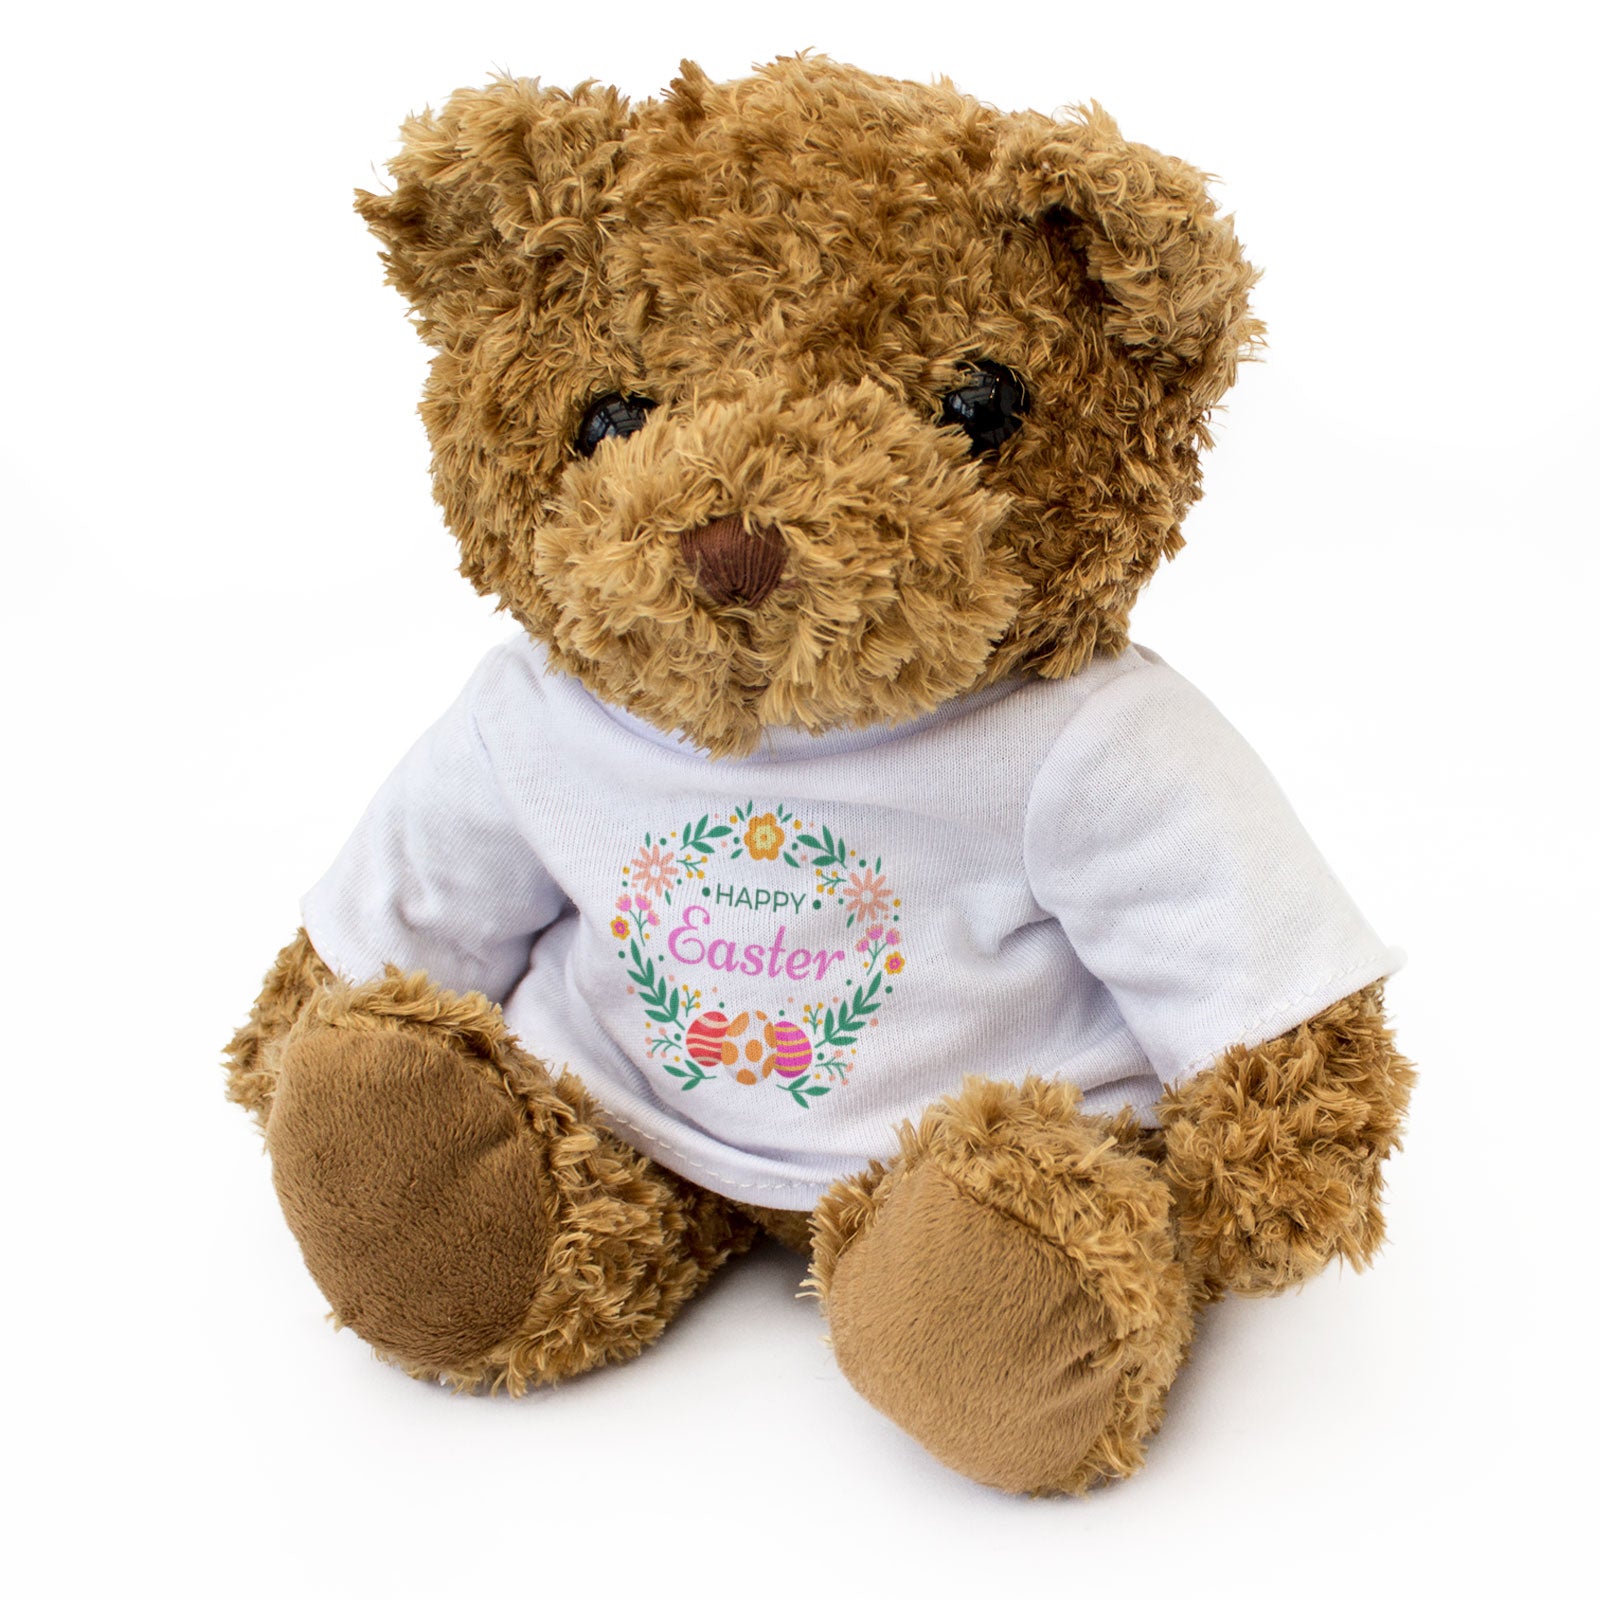 Happy Easter (Floral) - Teddy Bear - Gift Present